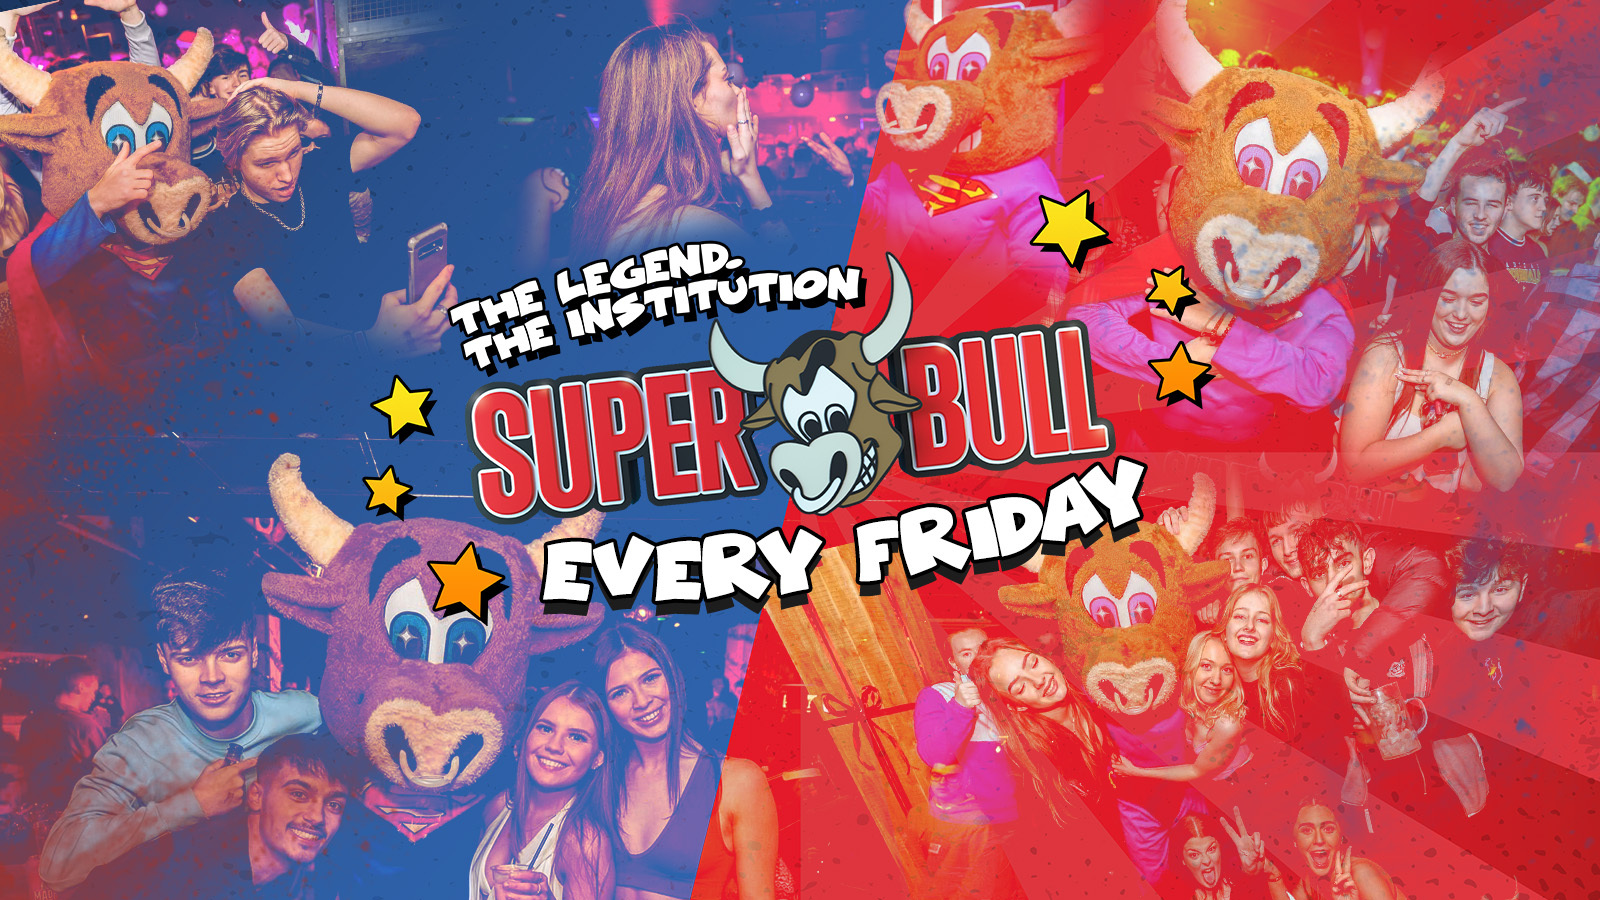 The Superbull – 95% SOLD – The Legend. The Institution – Fri 7th Oct